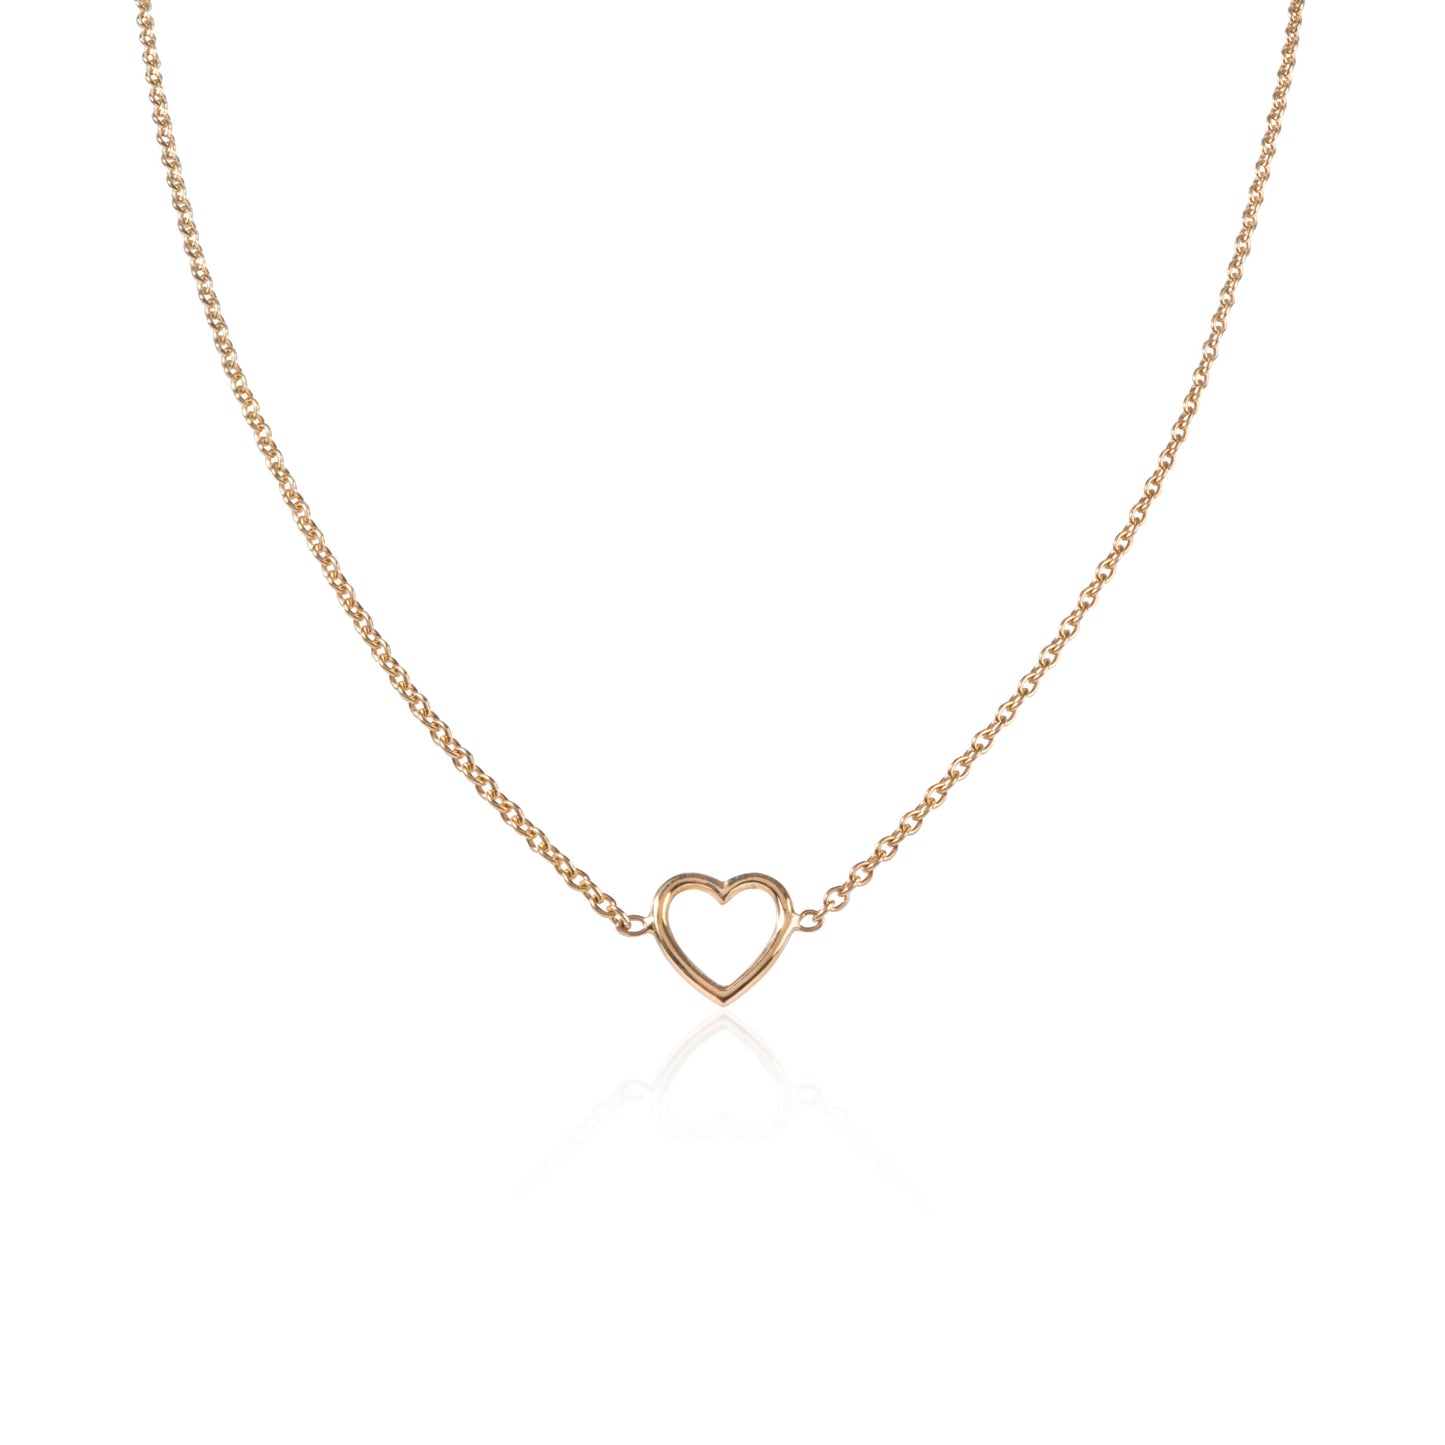 18ct yellow gold Heart Necklace by McFarlane Fine Jewellery